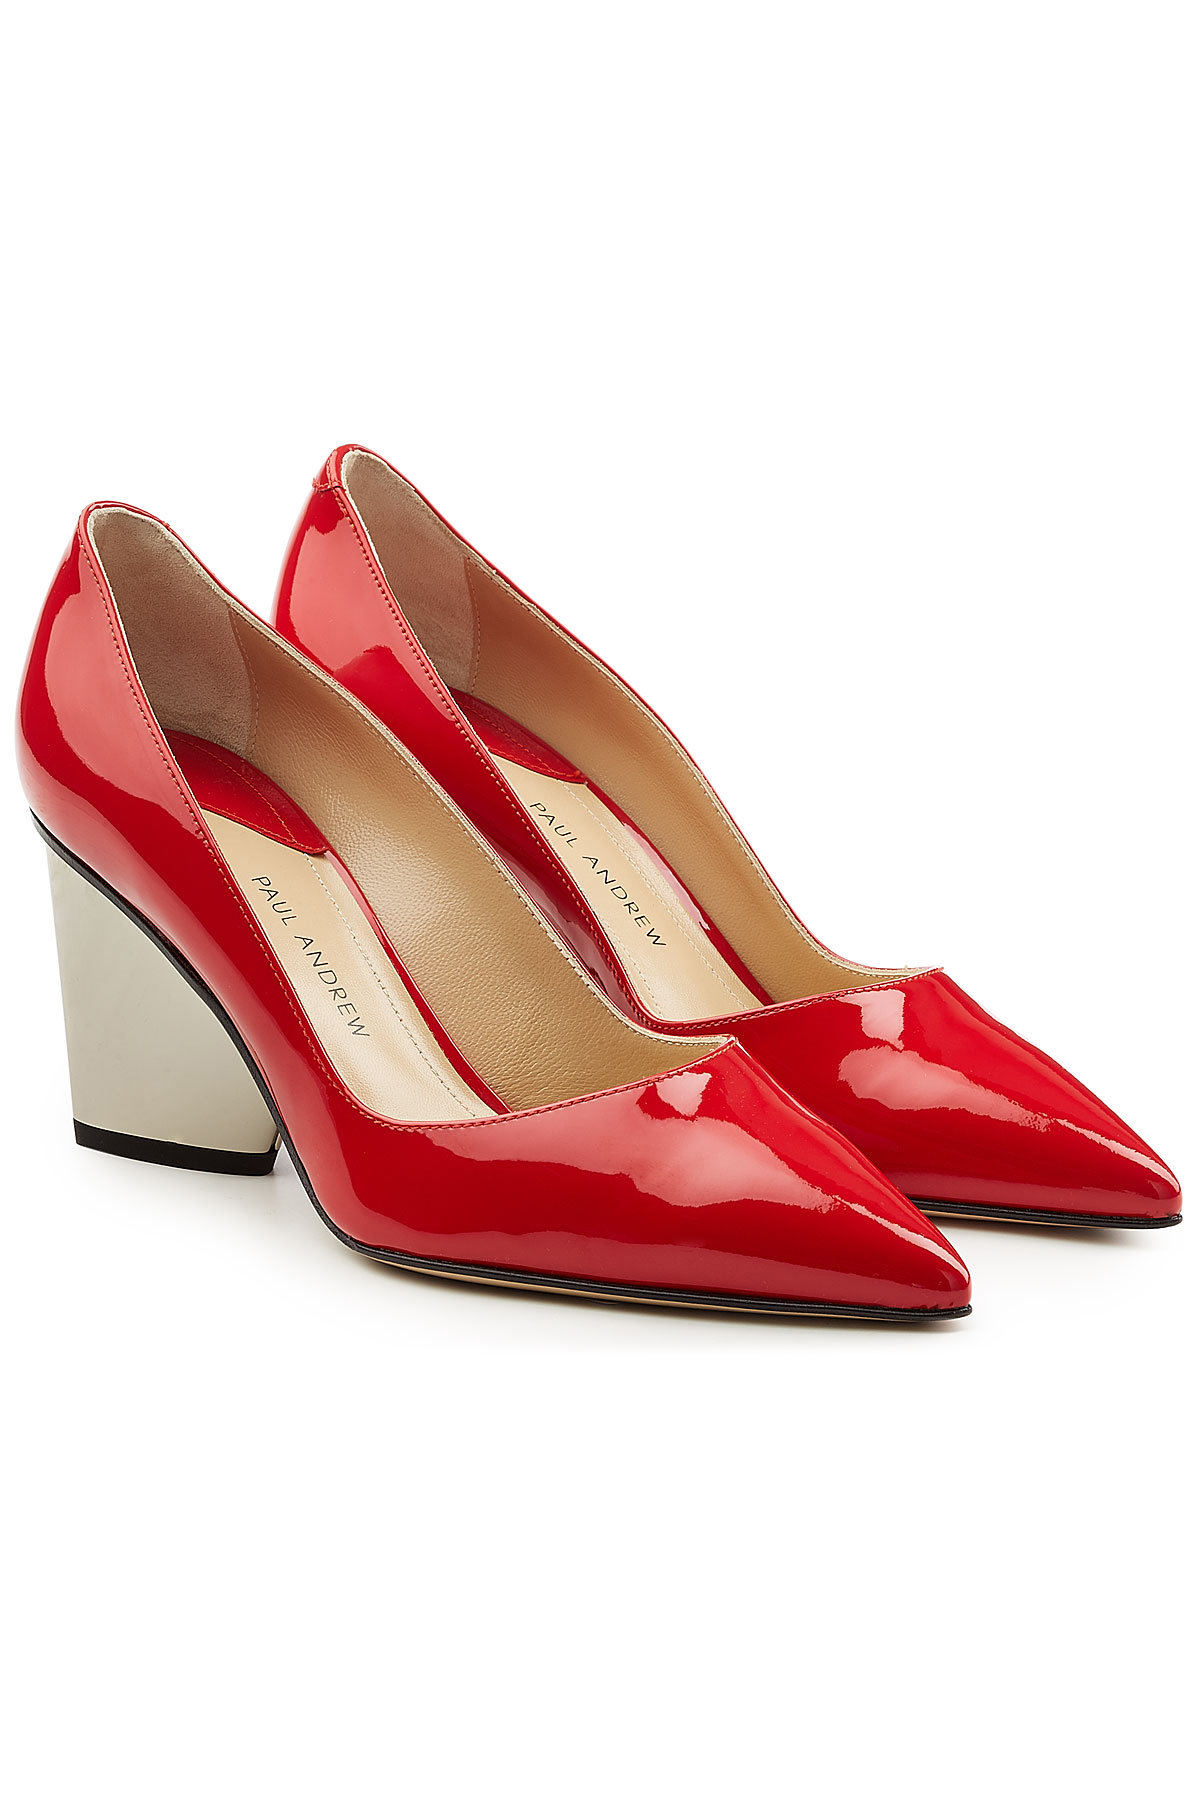 Lotta Patent Leather Pumps by Paul Andrew